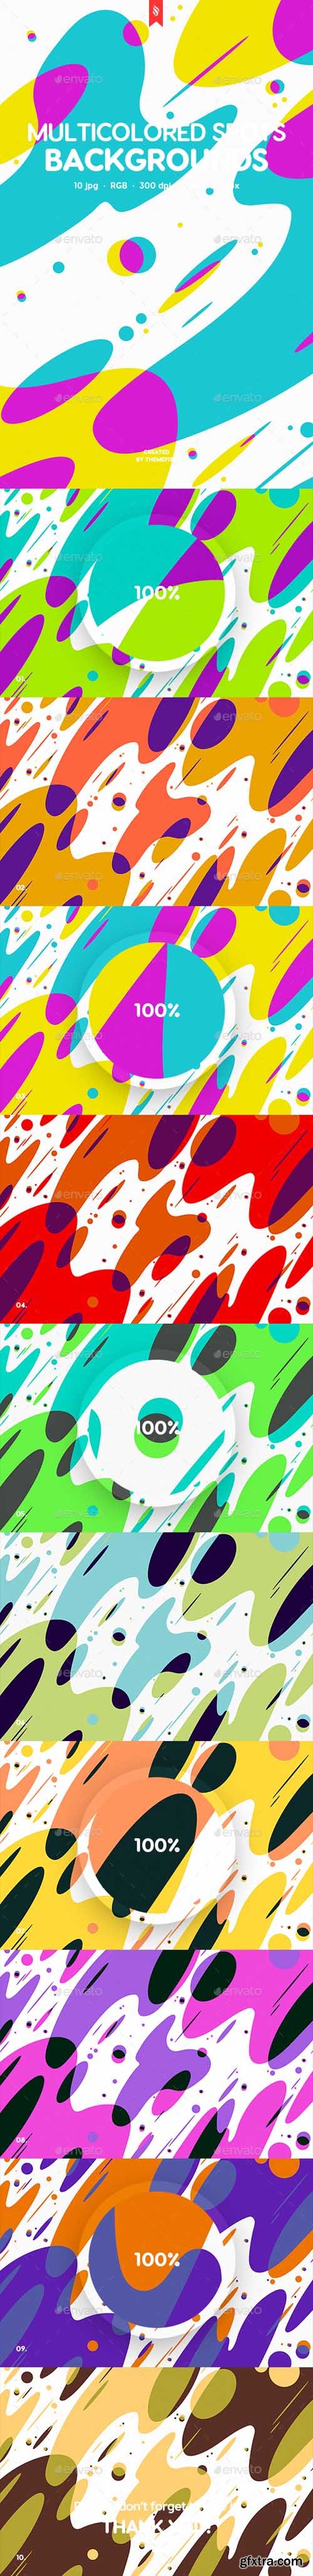 GR - Abstract Multicolored Spots Backgrounds 20105853